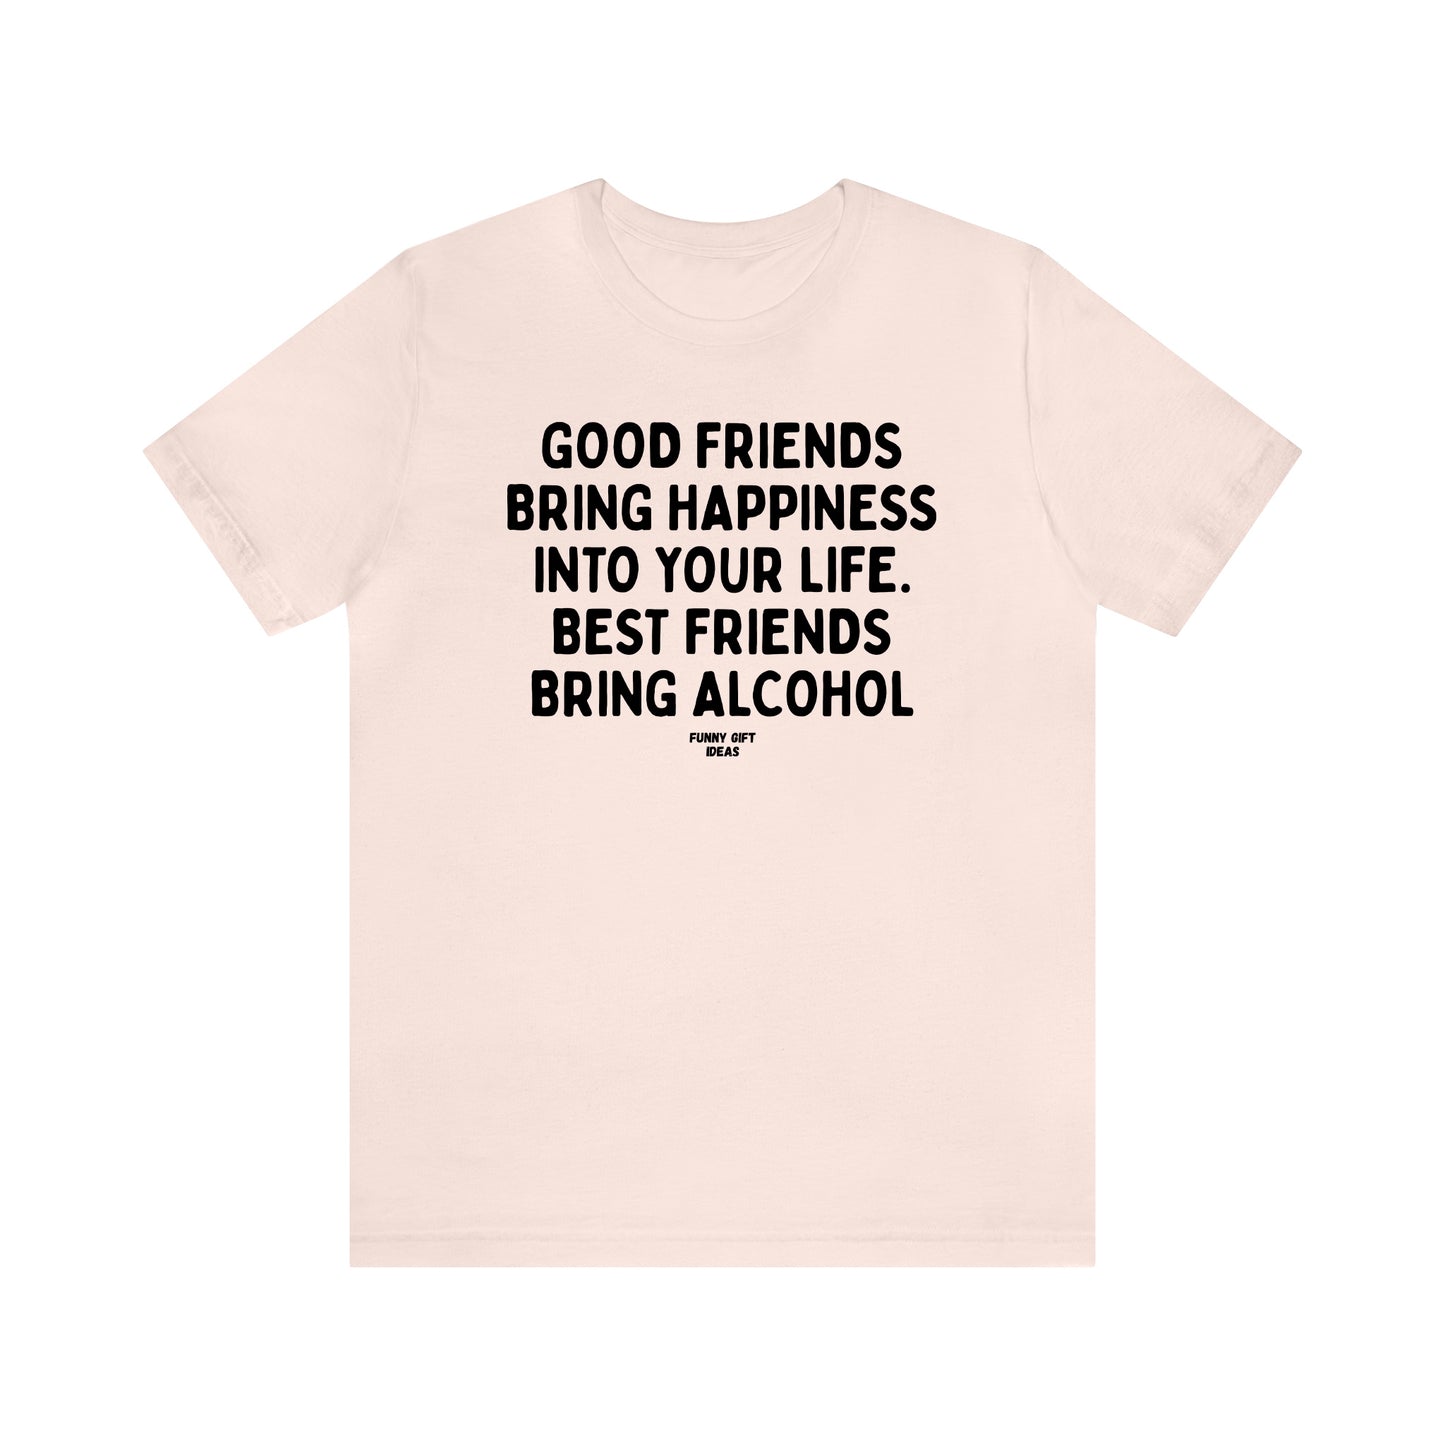 Funny Shirts for Women - Good Friends Bring Happiness Into Your Life. Best Friends Bring Alcohol - Women's T Shirts